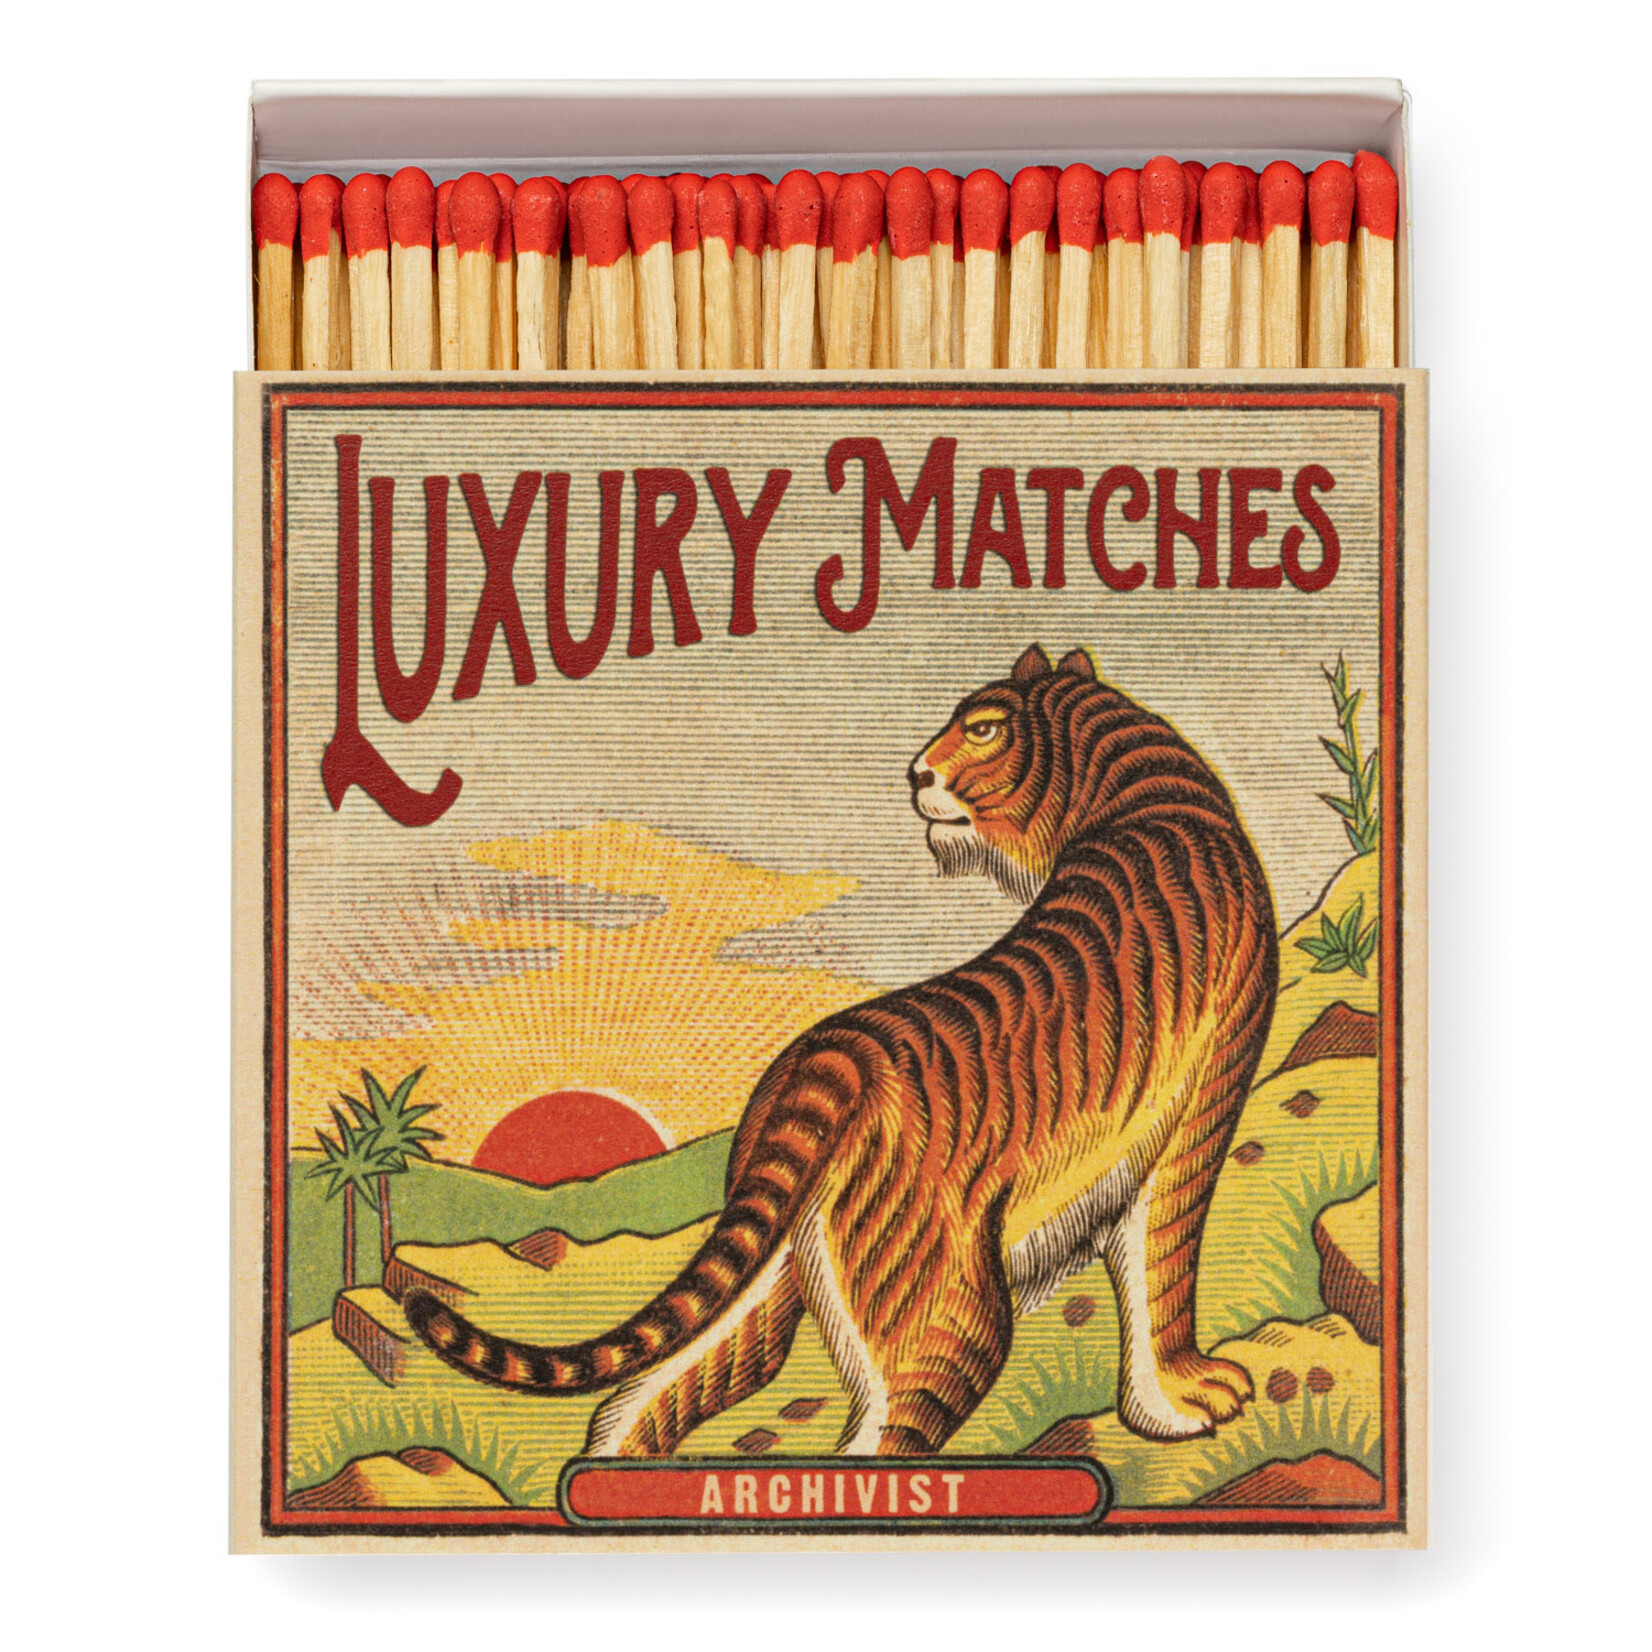 New Tiger Matches